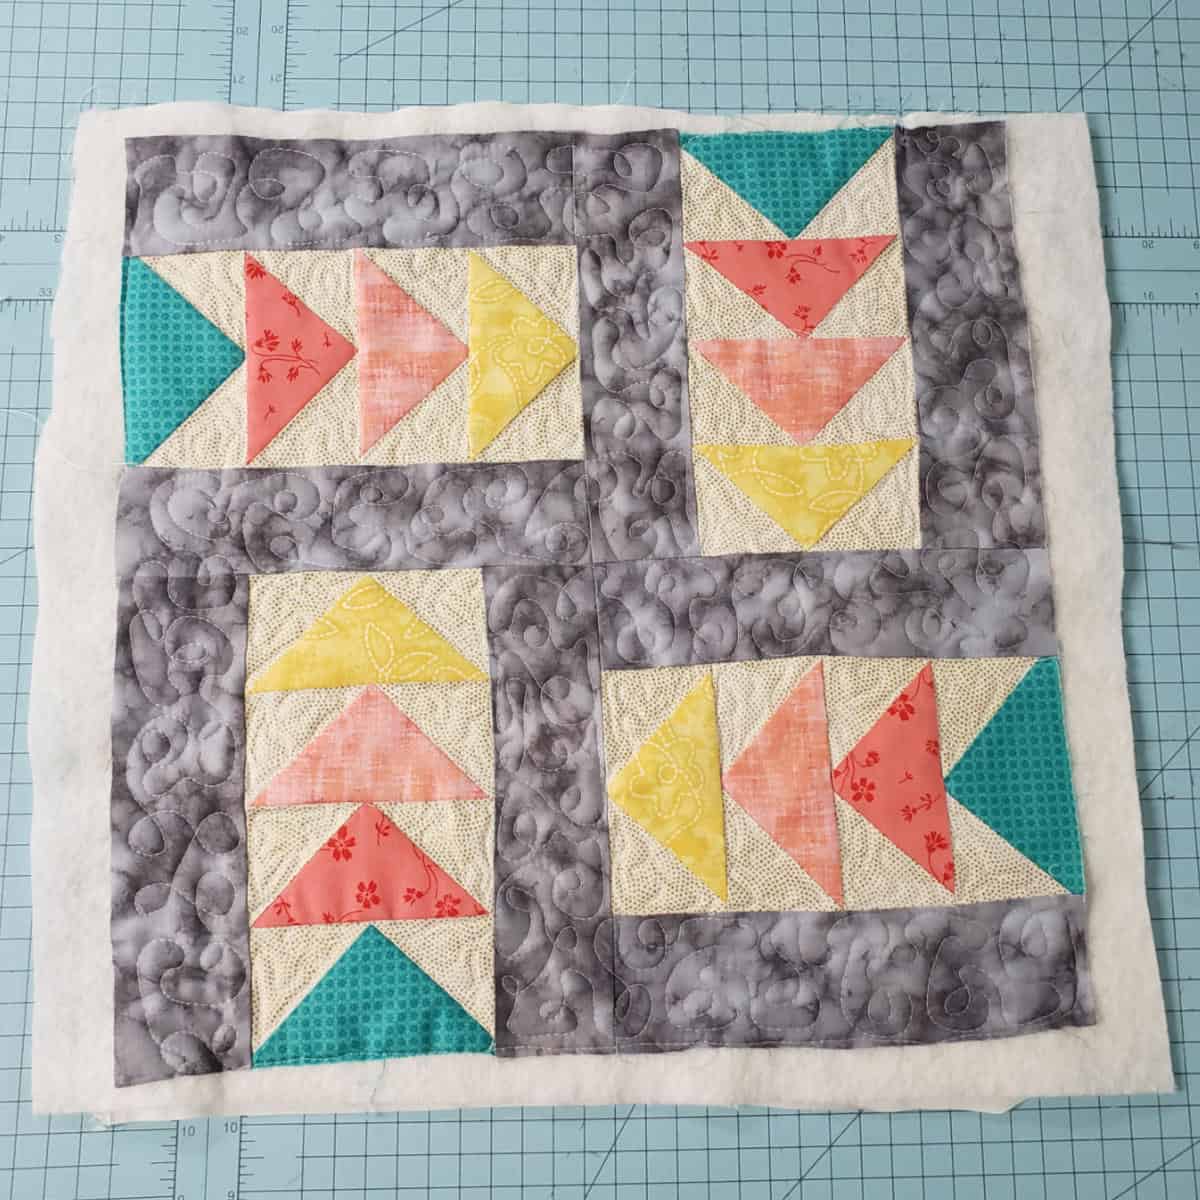 Adding batting and quilting to pillow top